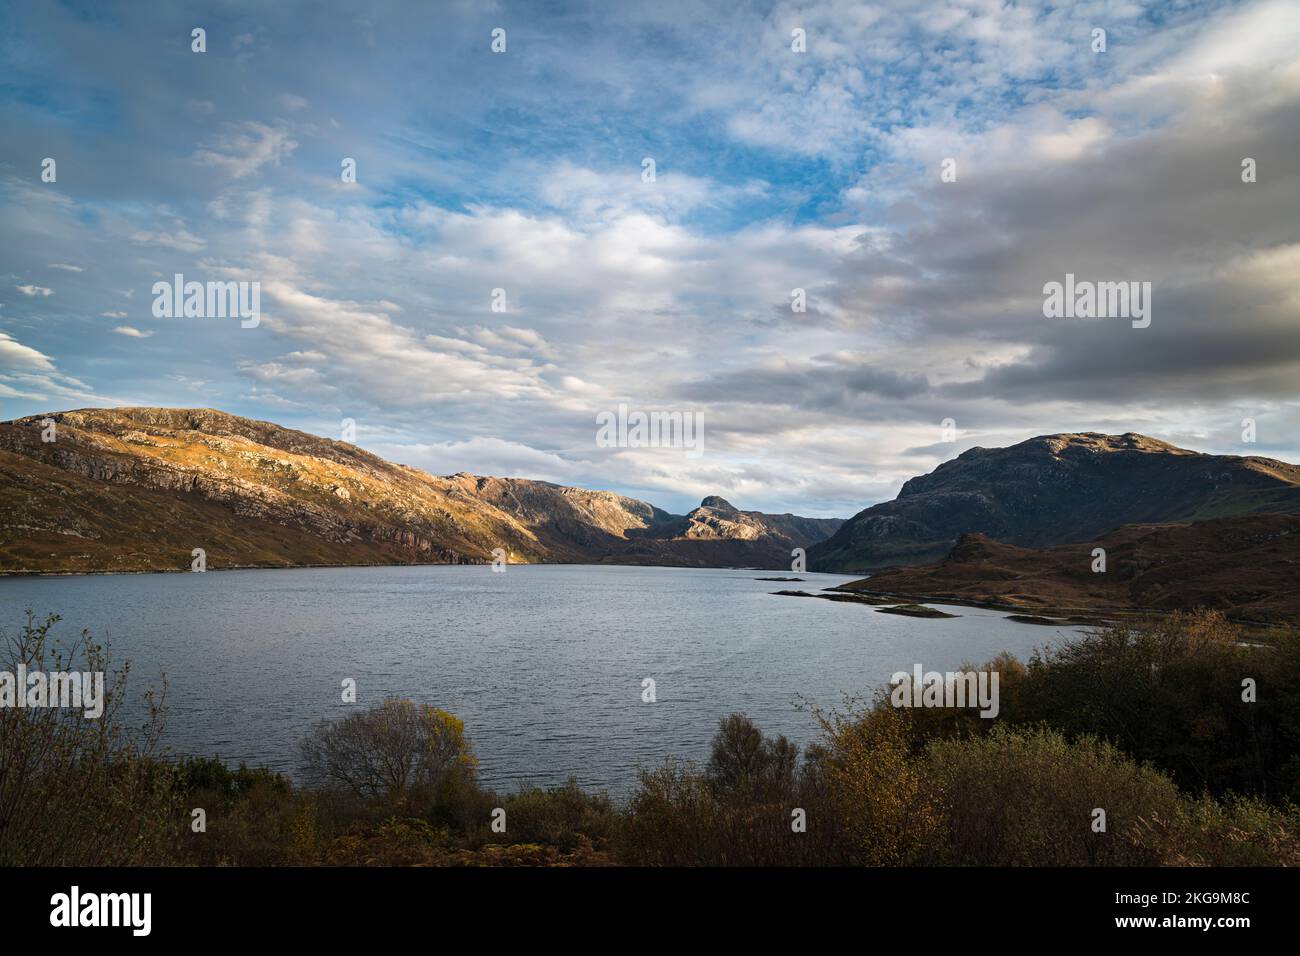 A pleasant, autumnal HDR image of Loch Glencoul with Stack of Glencoul in the distance near Unapool in Assynt, Sutherland, Scotland. 25 October 2022 Stock Photo